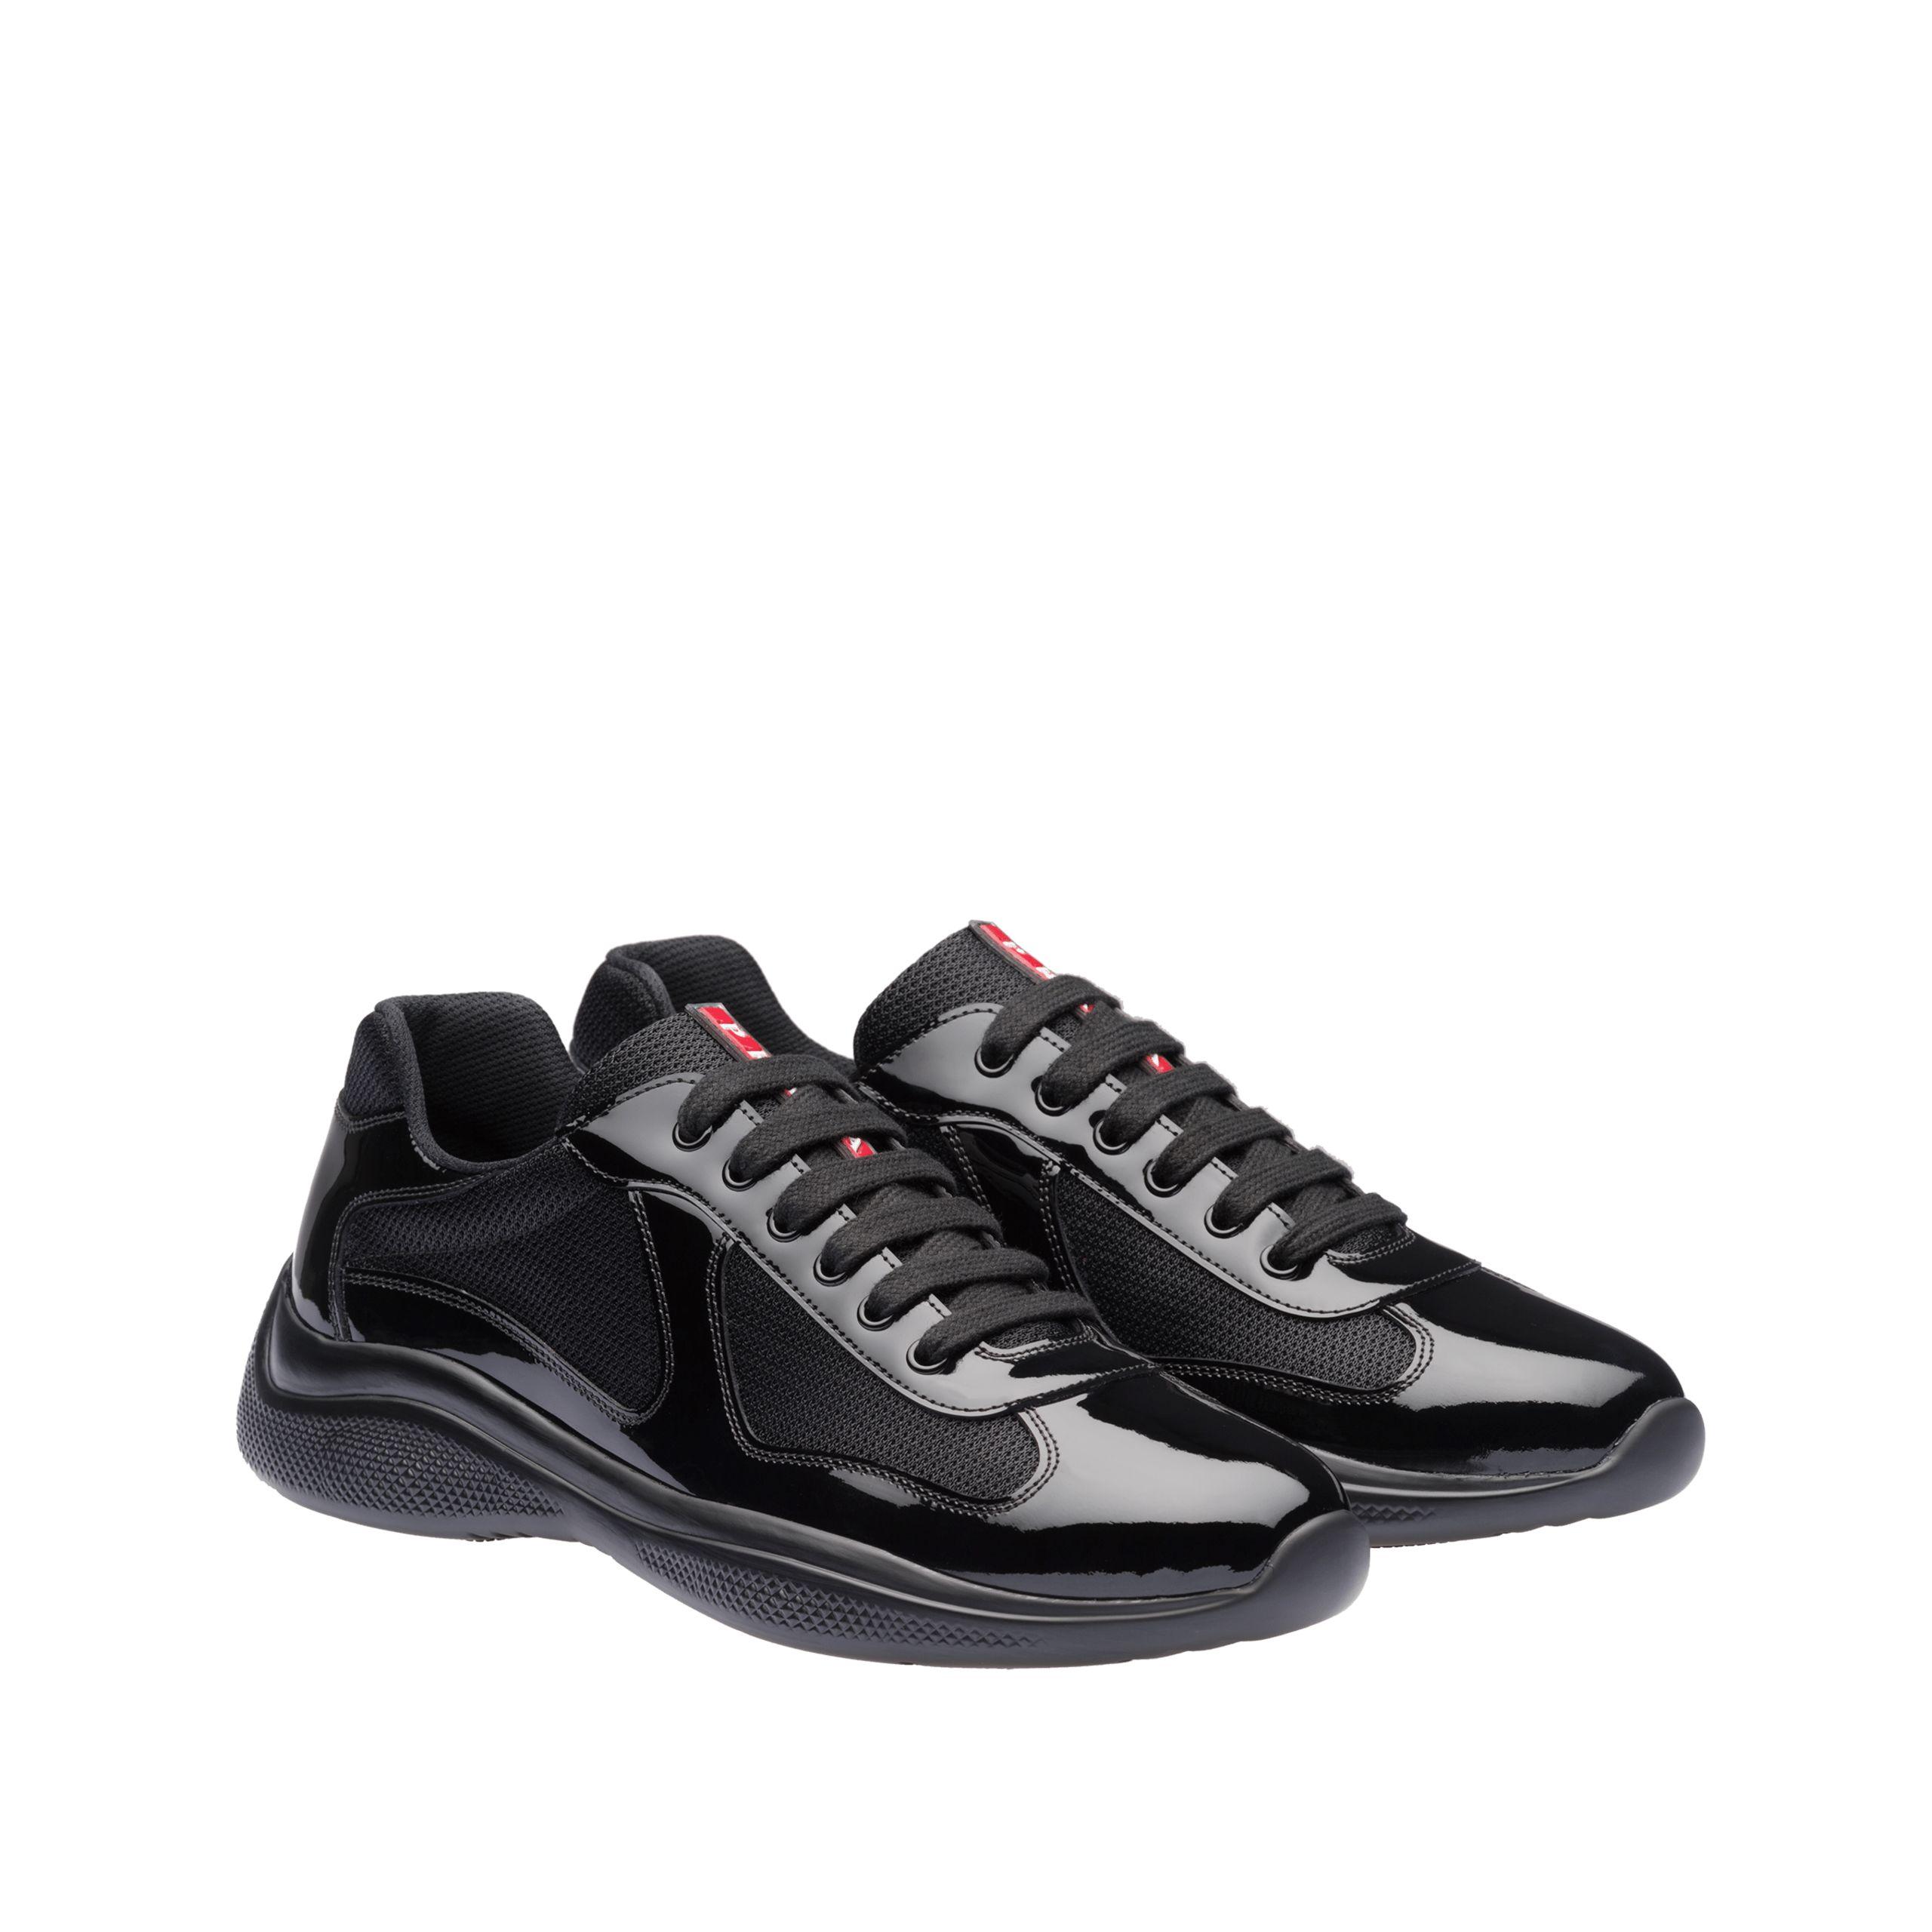 Prada Patent Leather And Technical Fabric Sneakers in Black for Men - Lyst